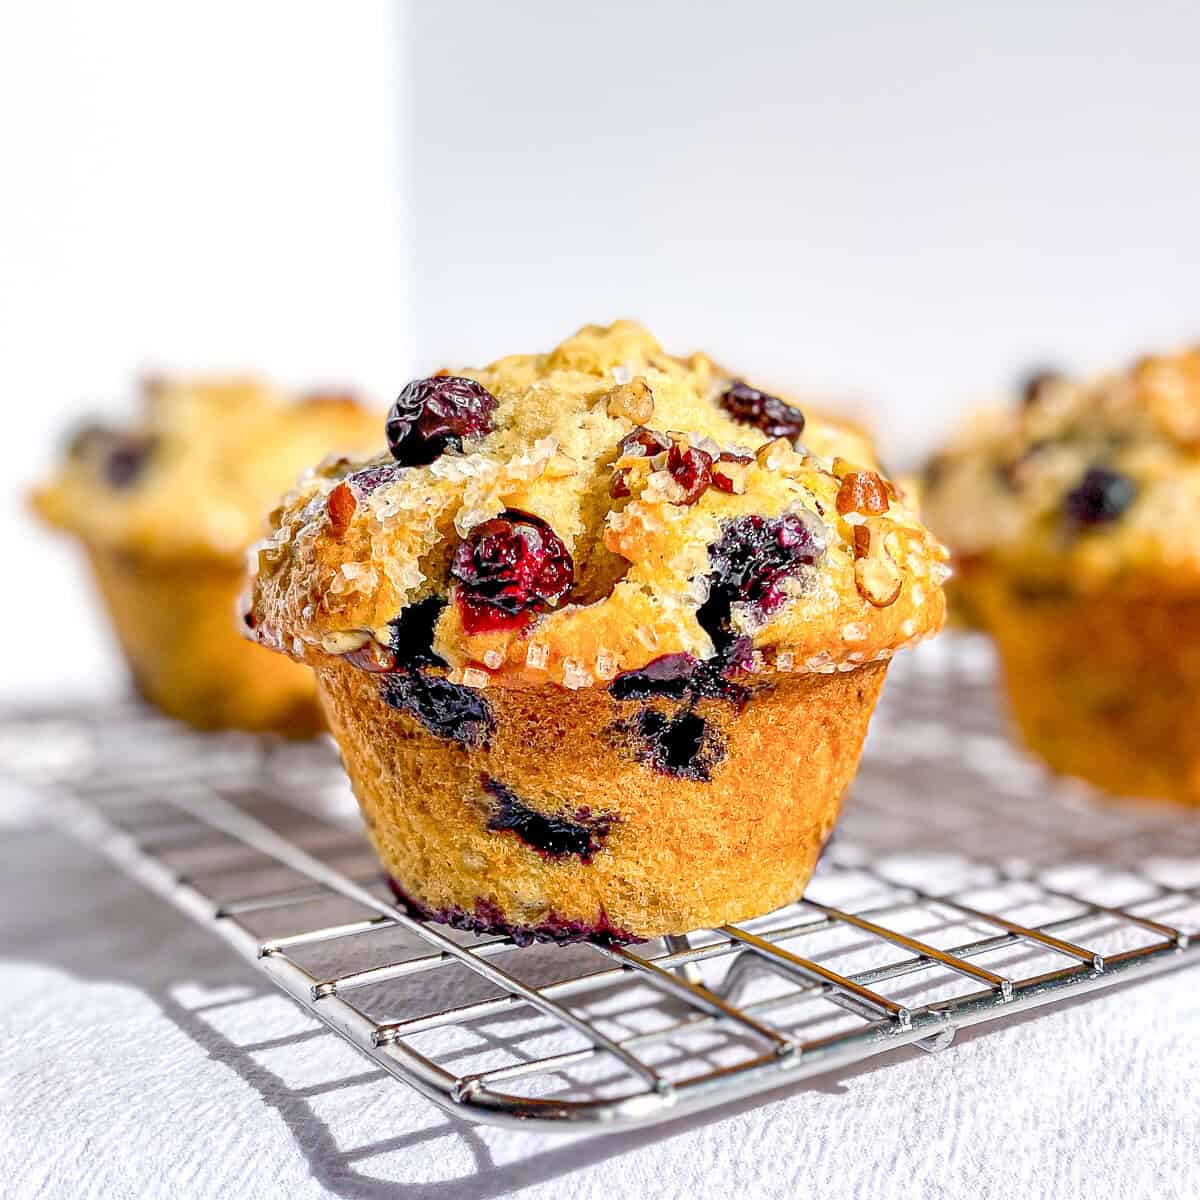 Blueberry muffin on a wire rack.